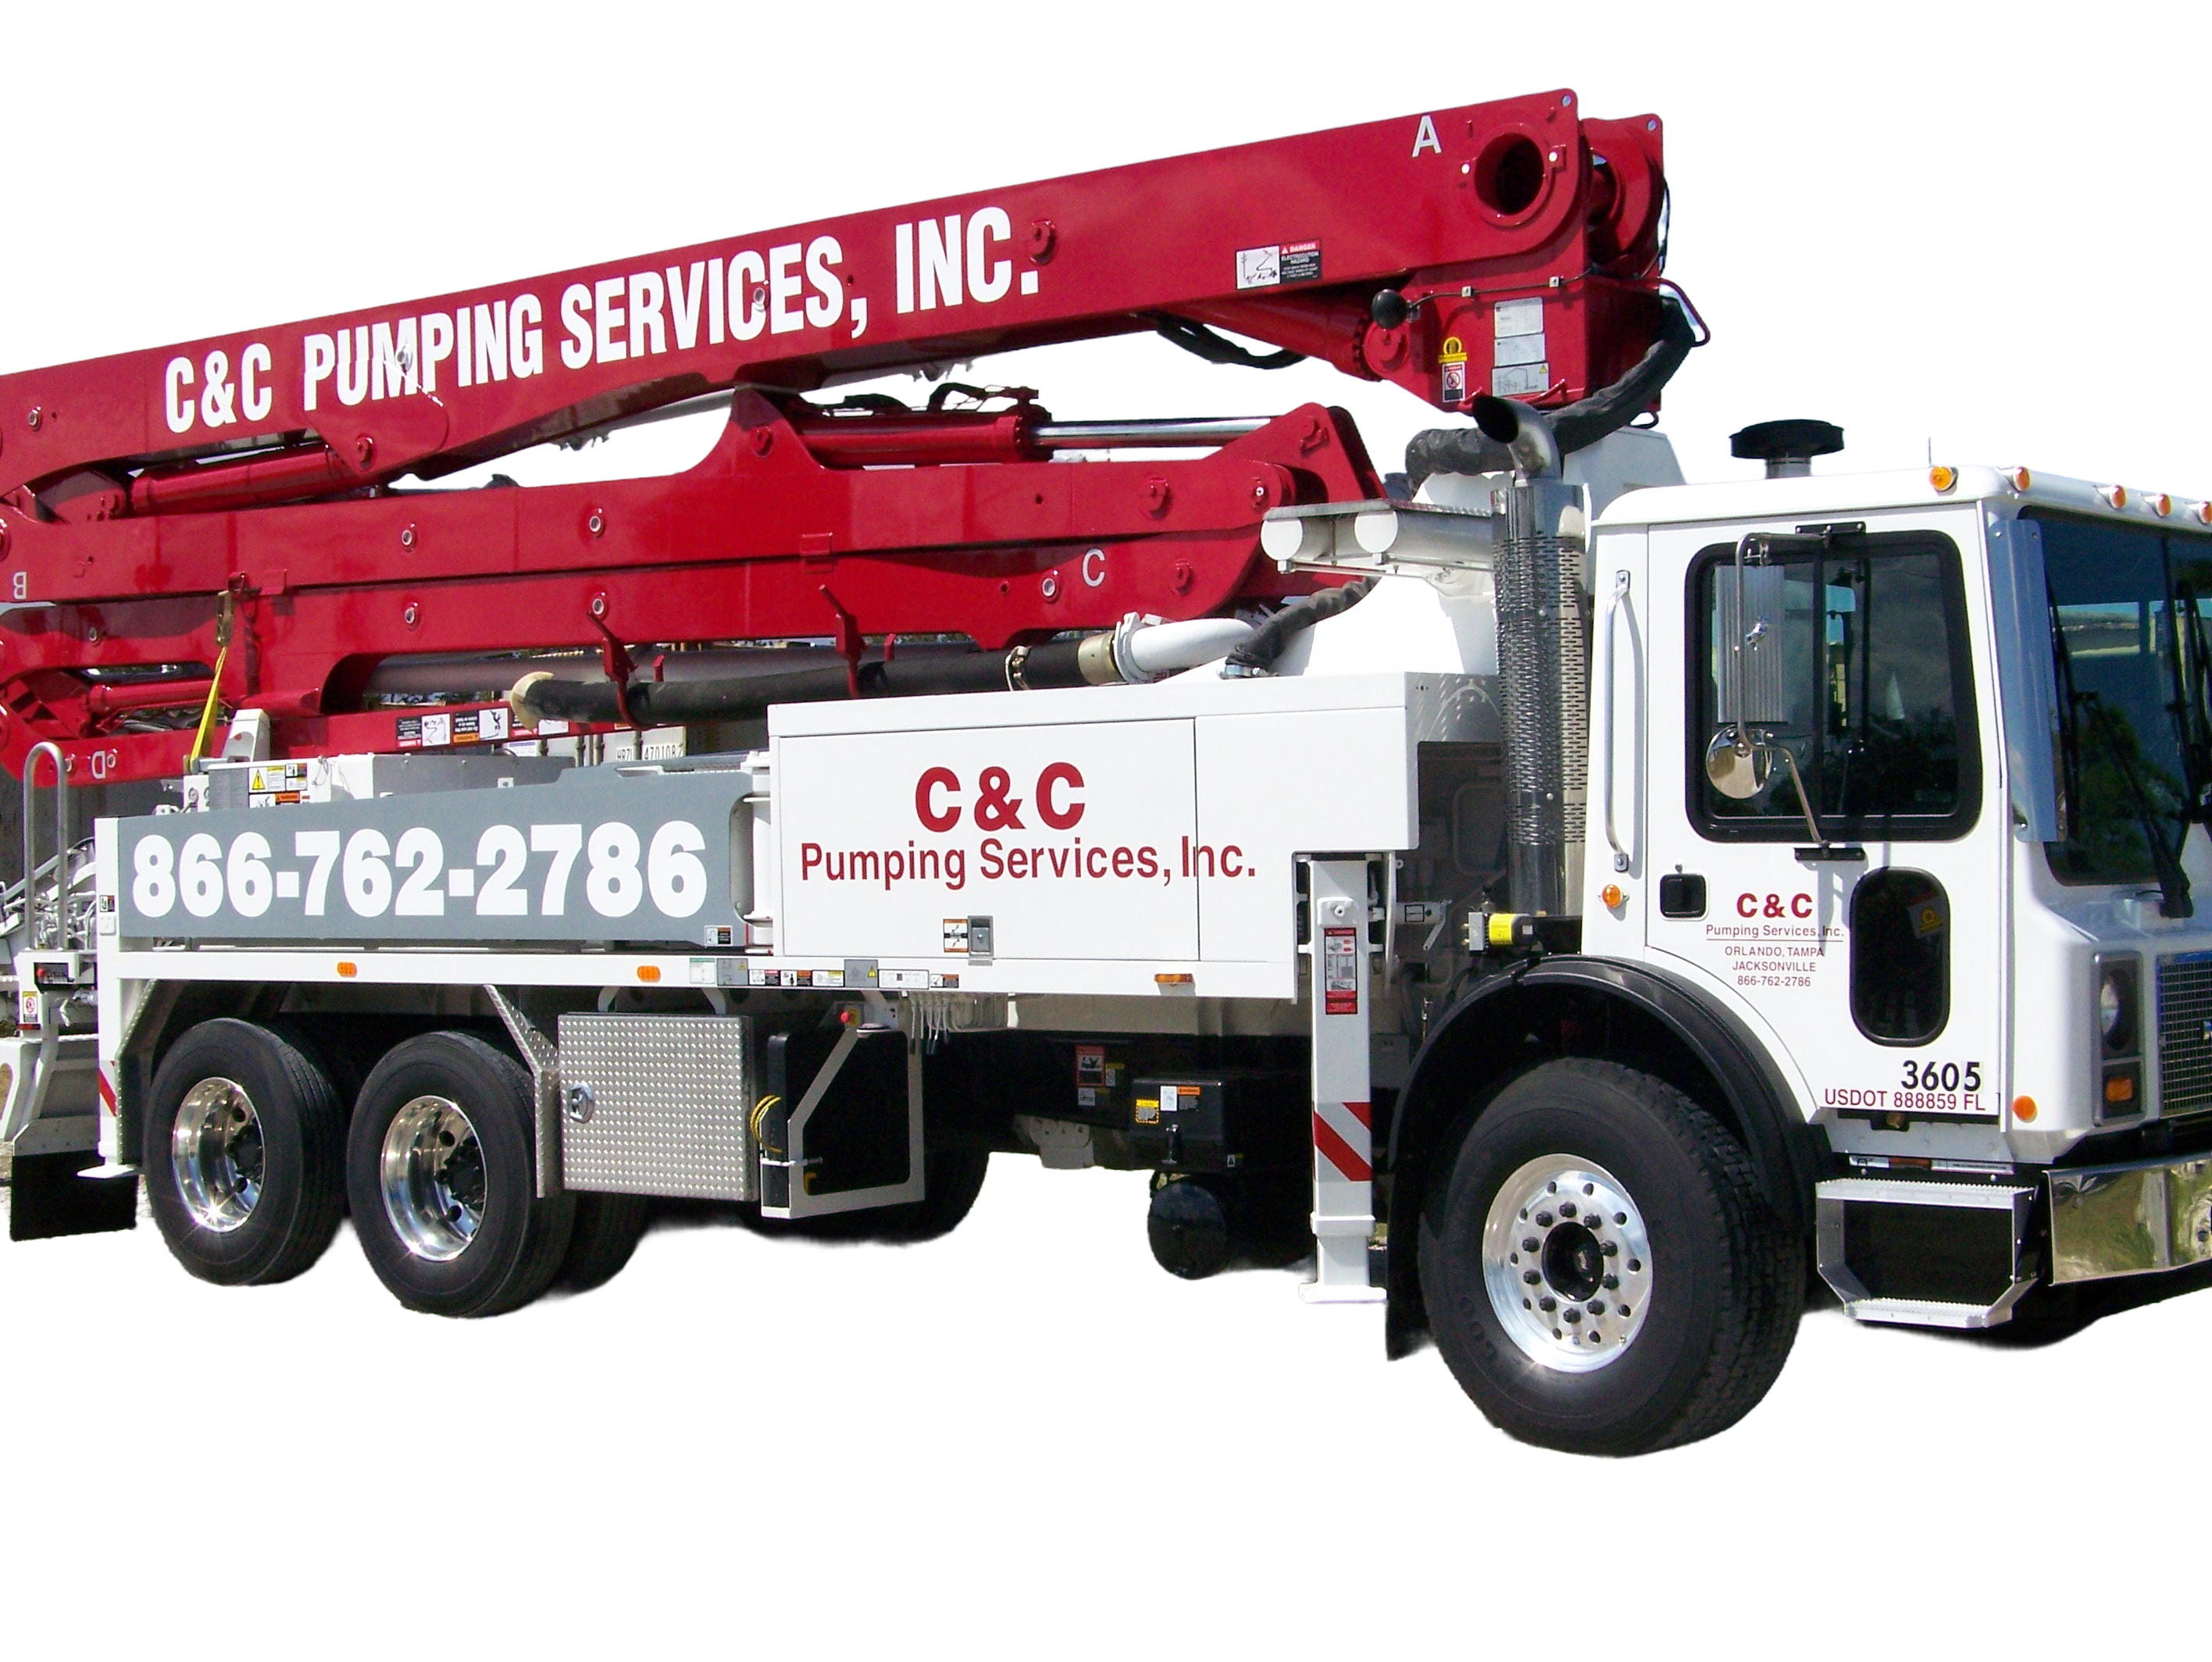 Boom Pump Services provided by C&C Concrete Pumping Services